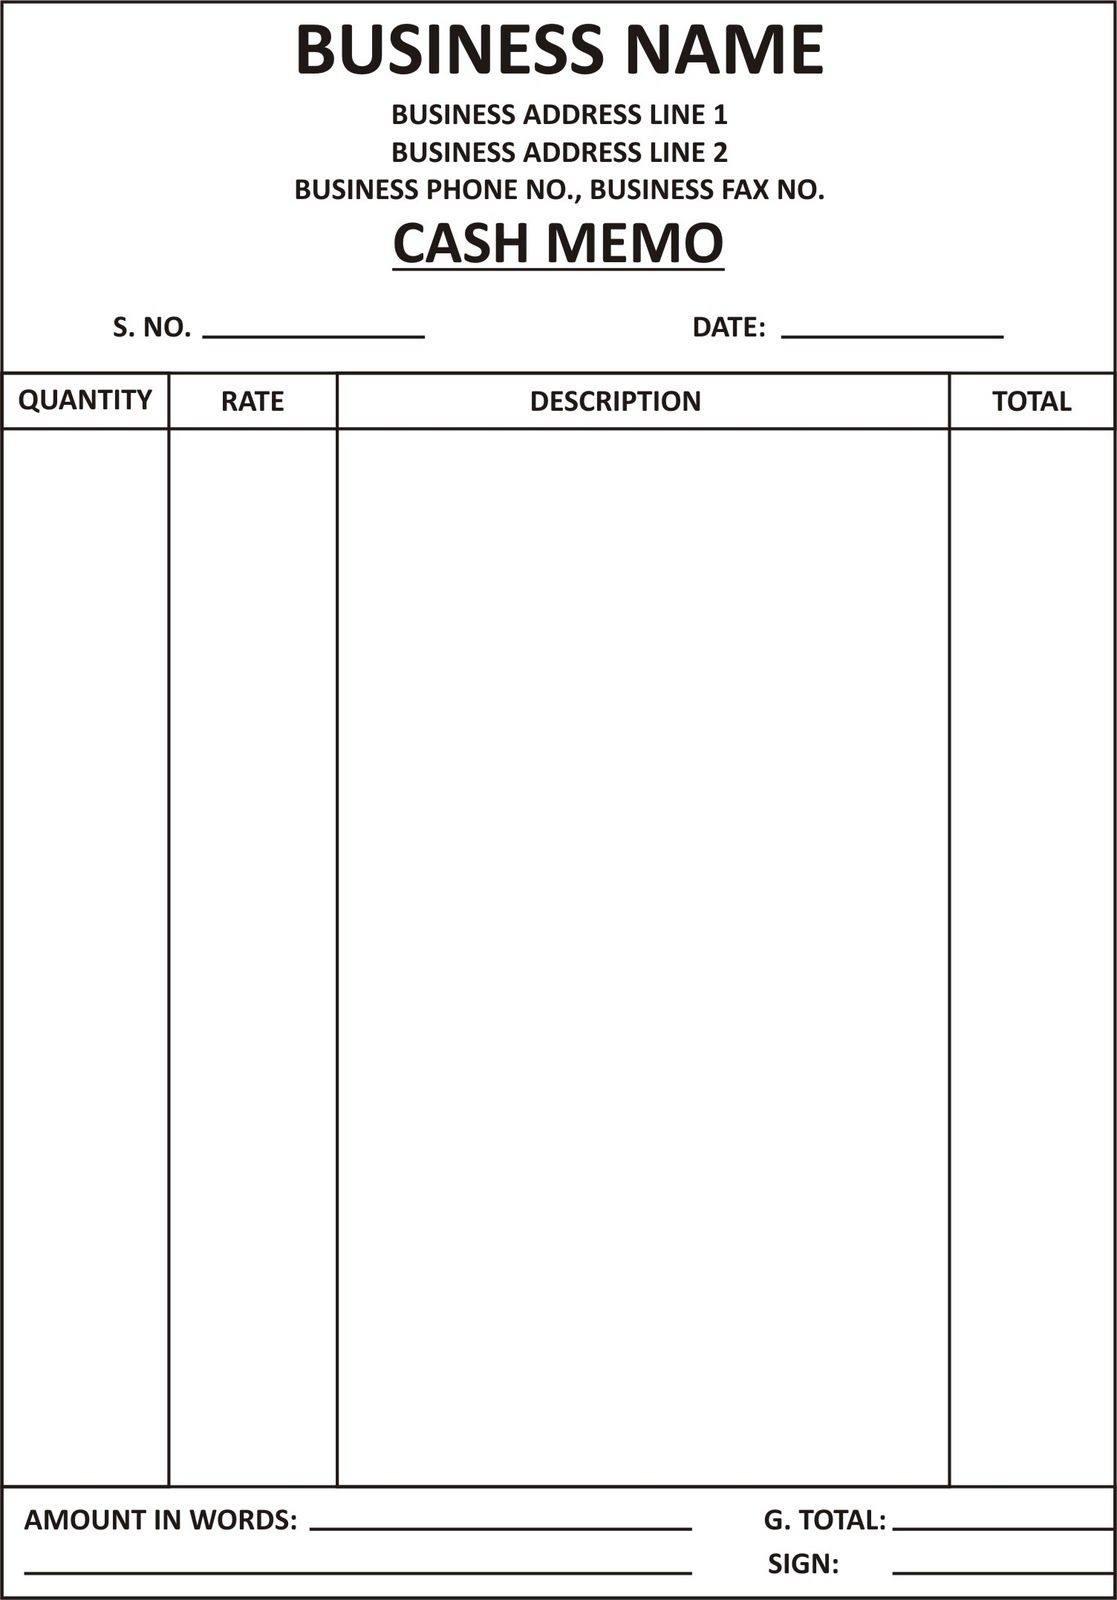 cash bill format submited images pic 2 fly invoice format cash bill edit format